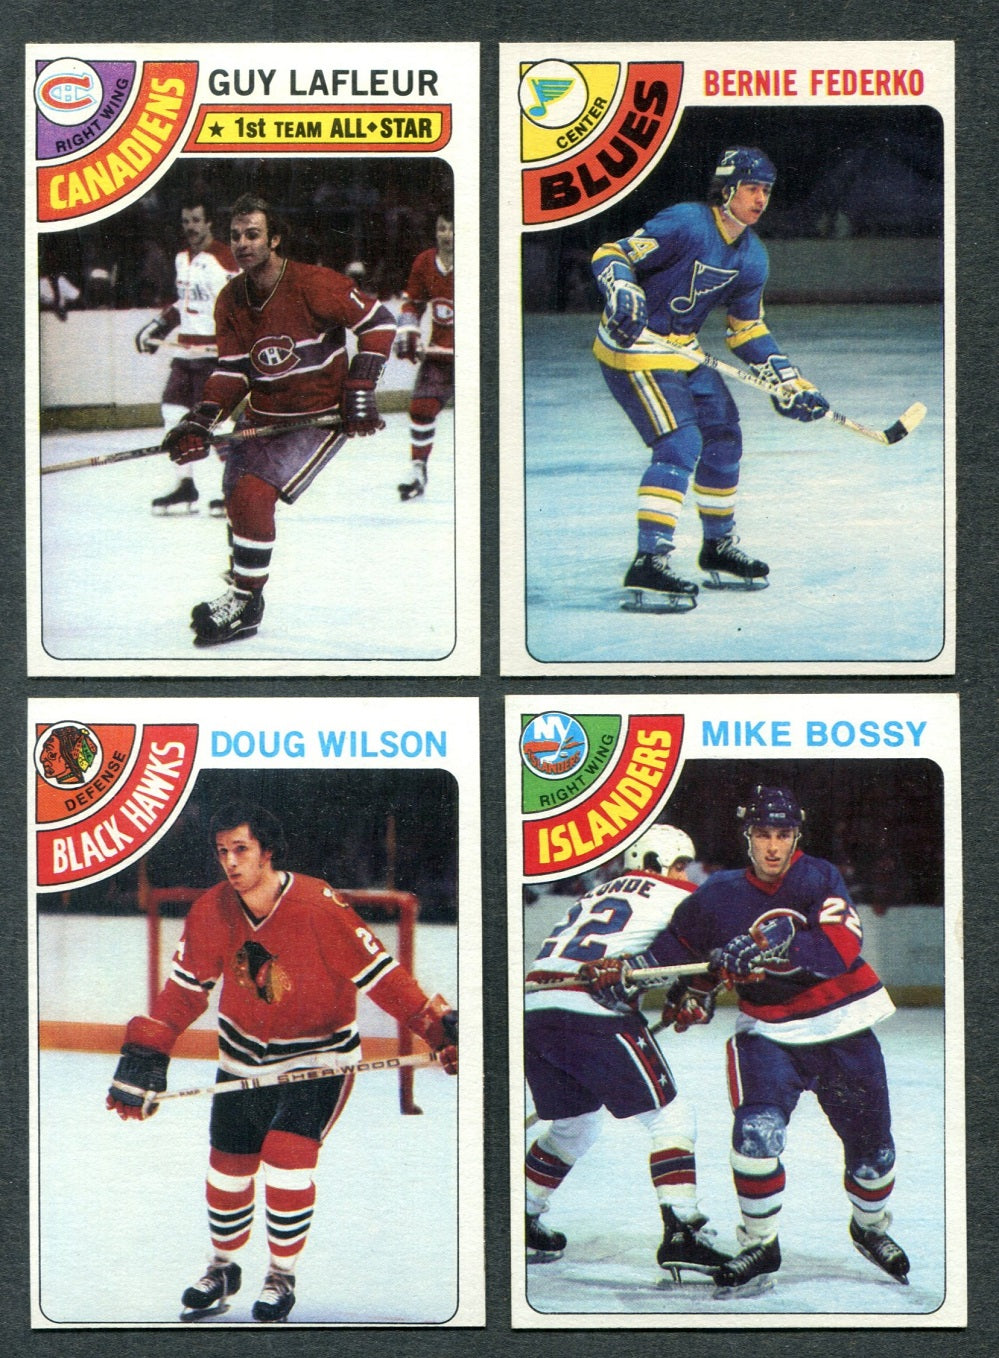 1978/79 Topps Hockety Complete Set EX/MT NM (264) (24-354)